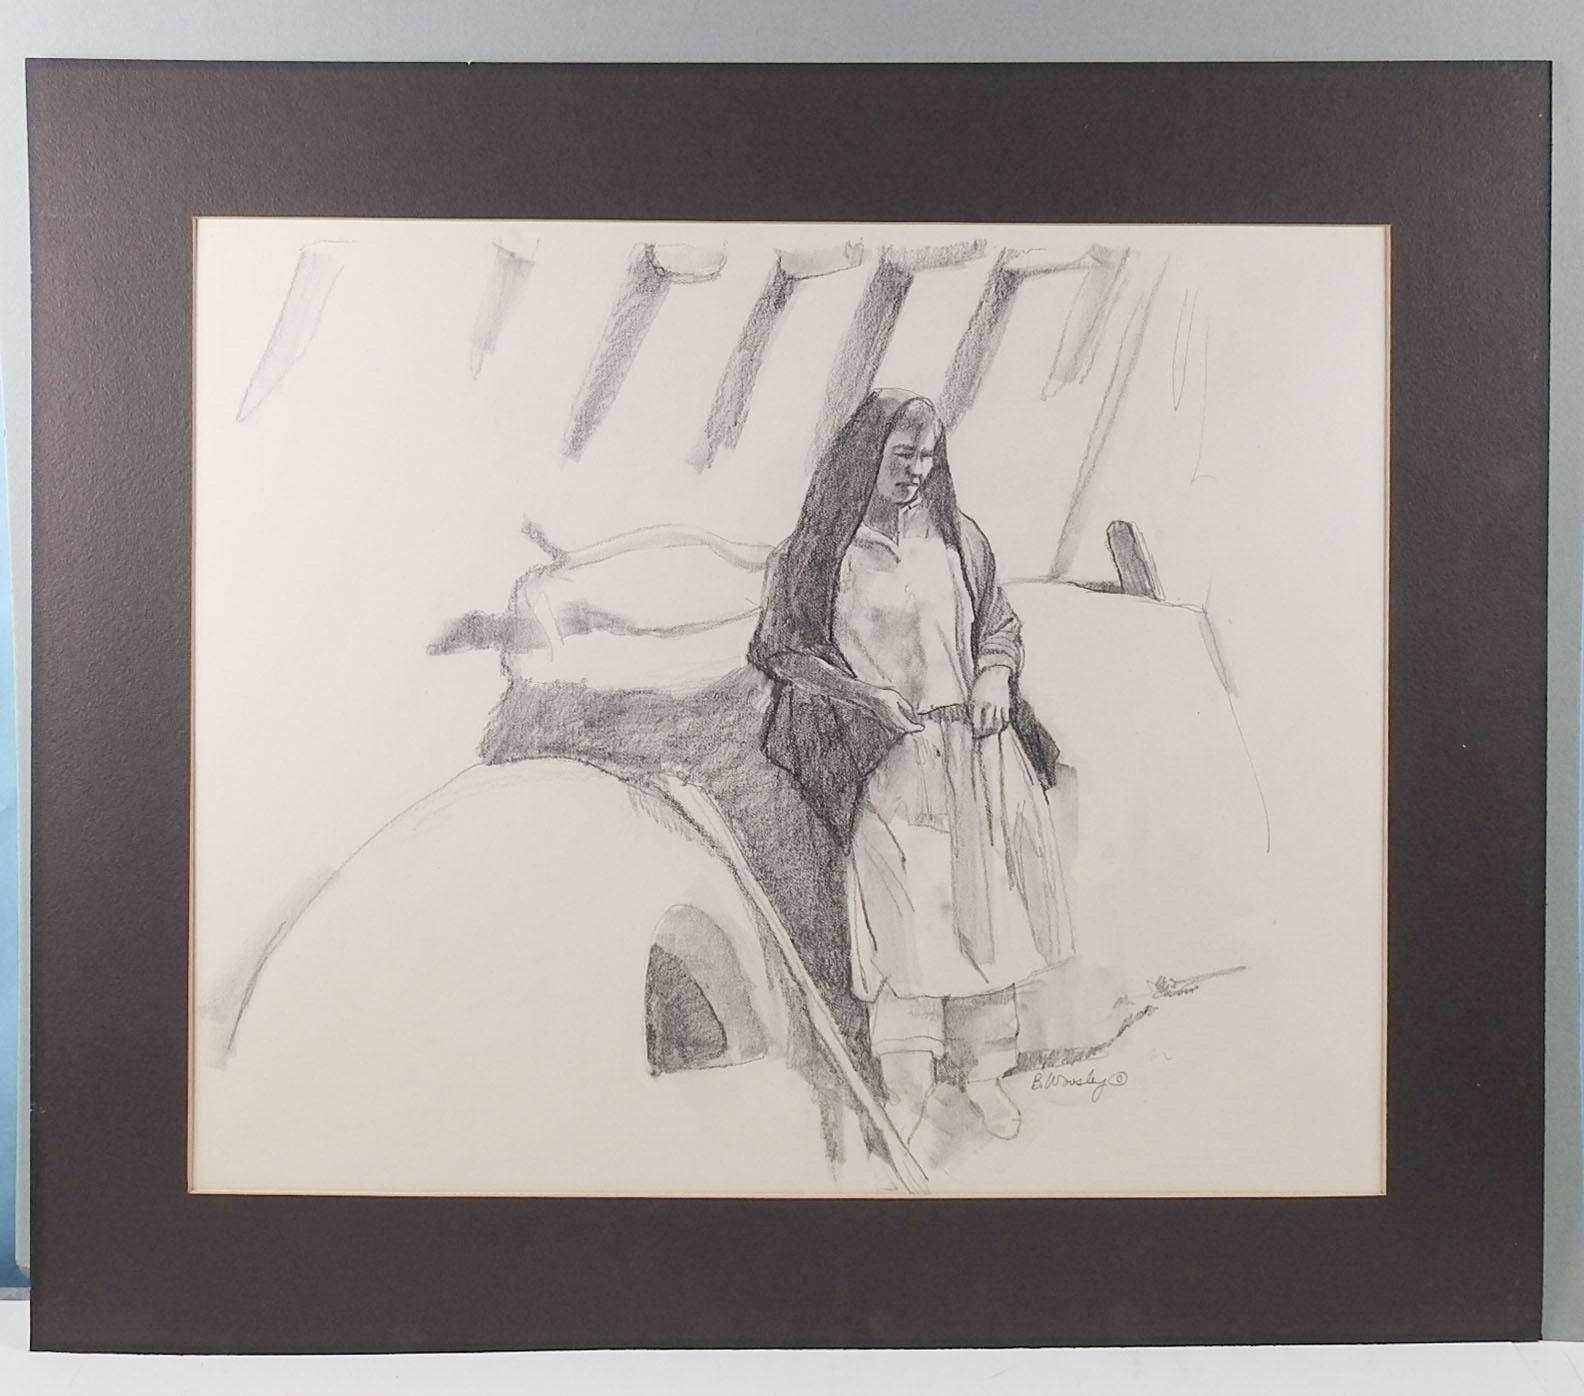 Late 20th century pencil study on artist board of a Pueblo woman by Brigitte Woosley. Signed lower right. Unframed. Displayed in black mat with backing. View area, 23.5